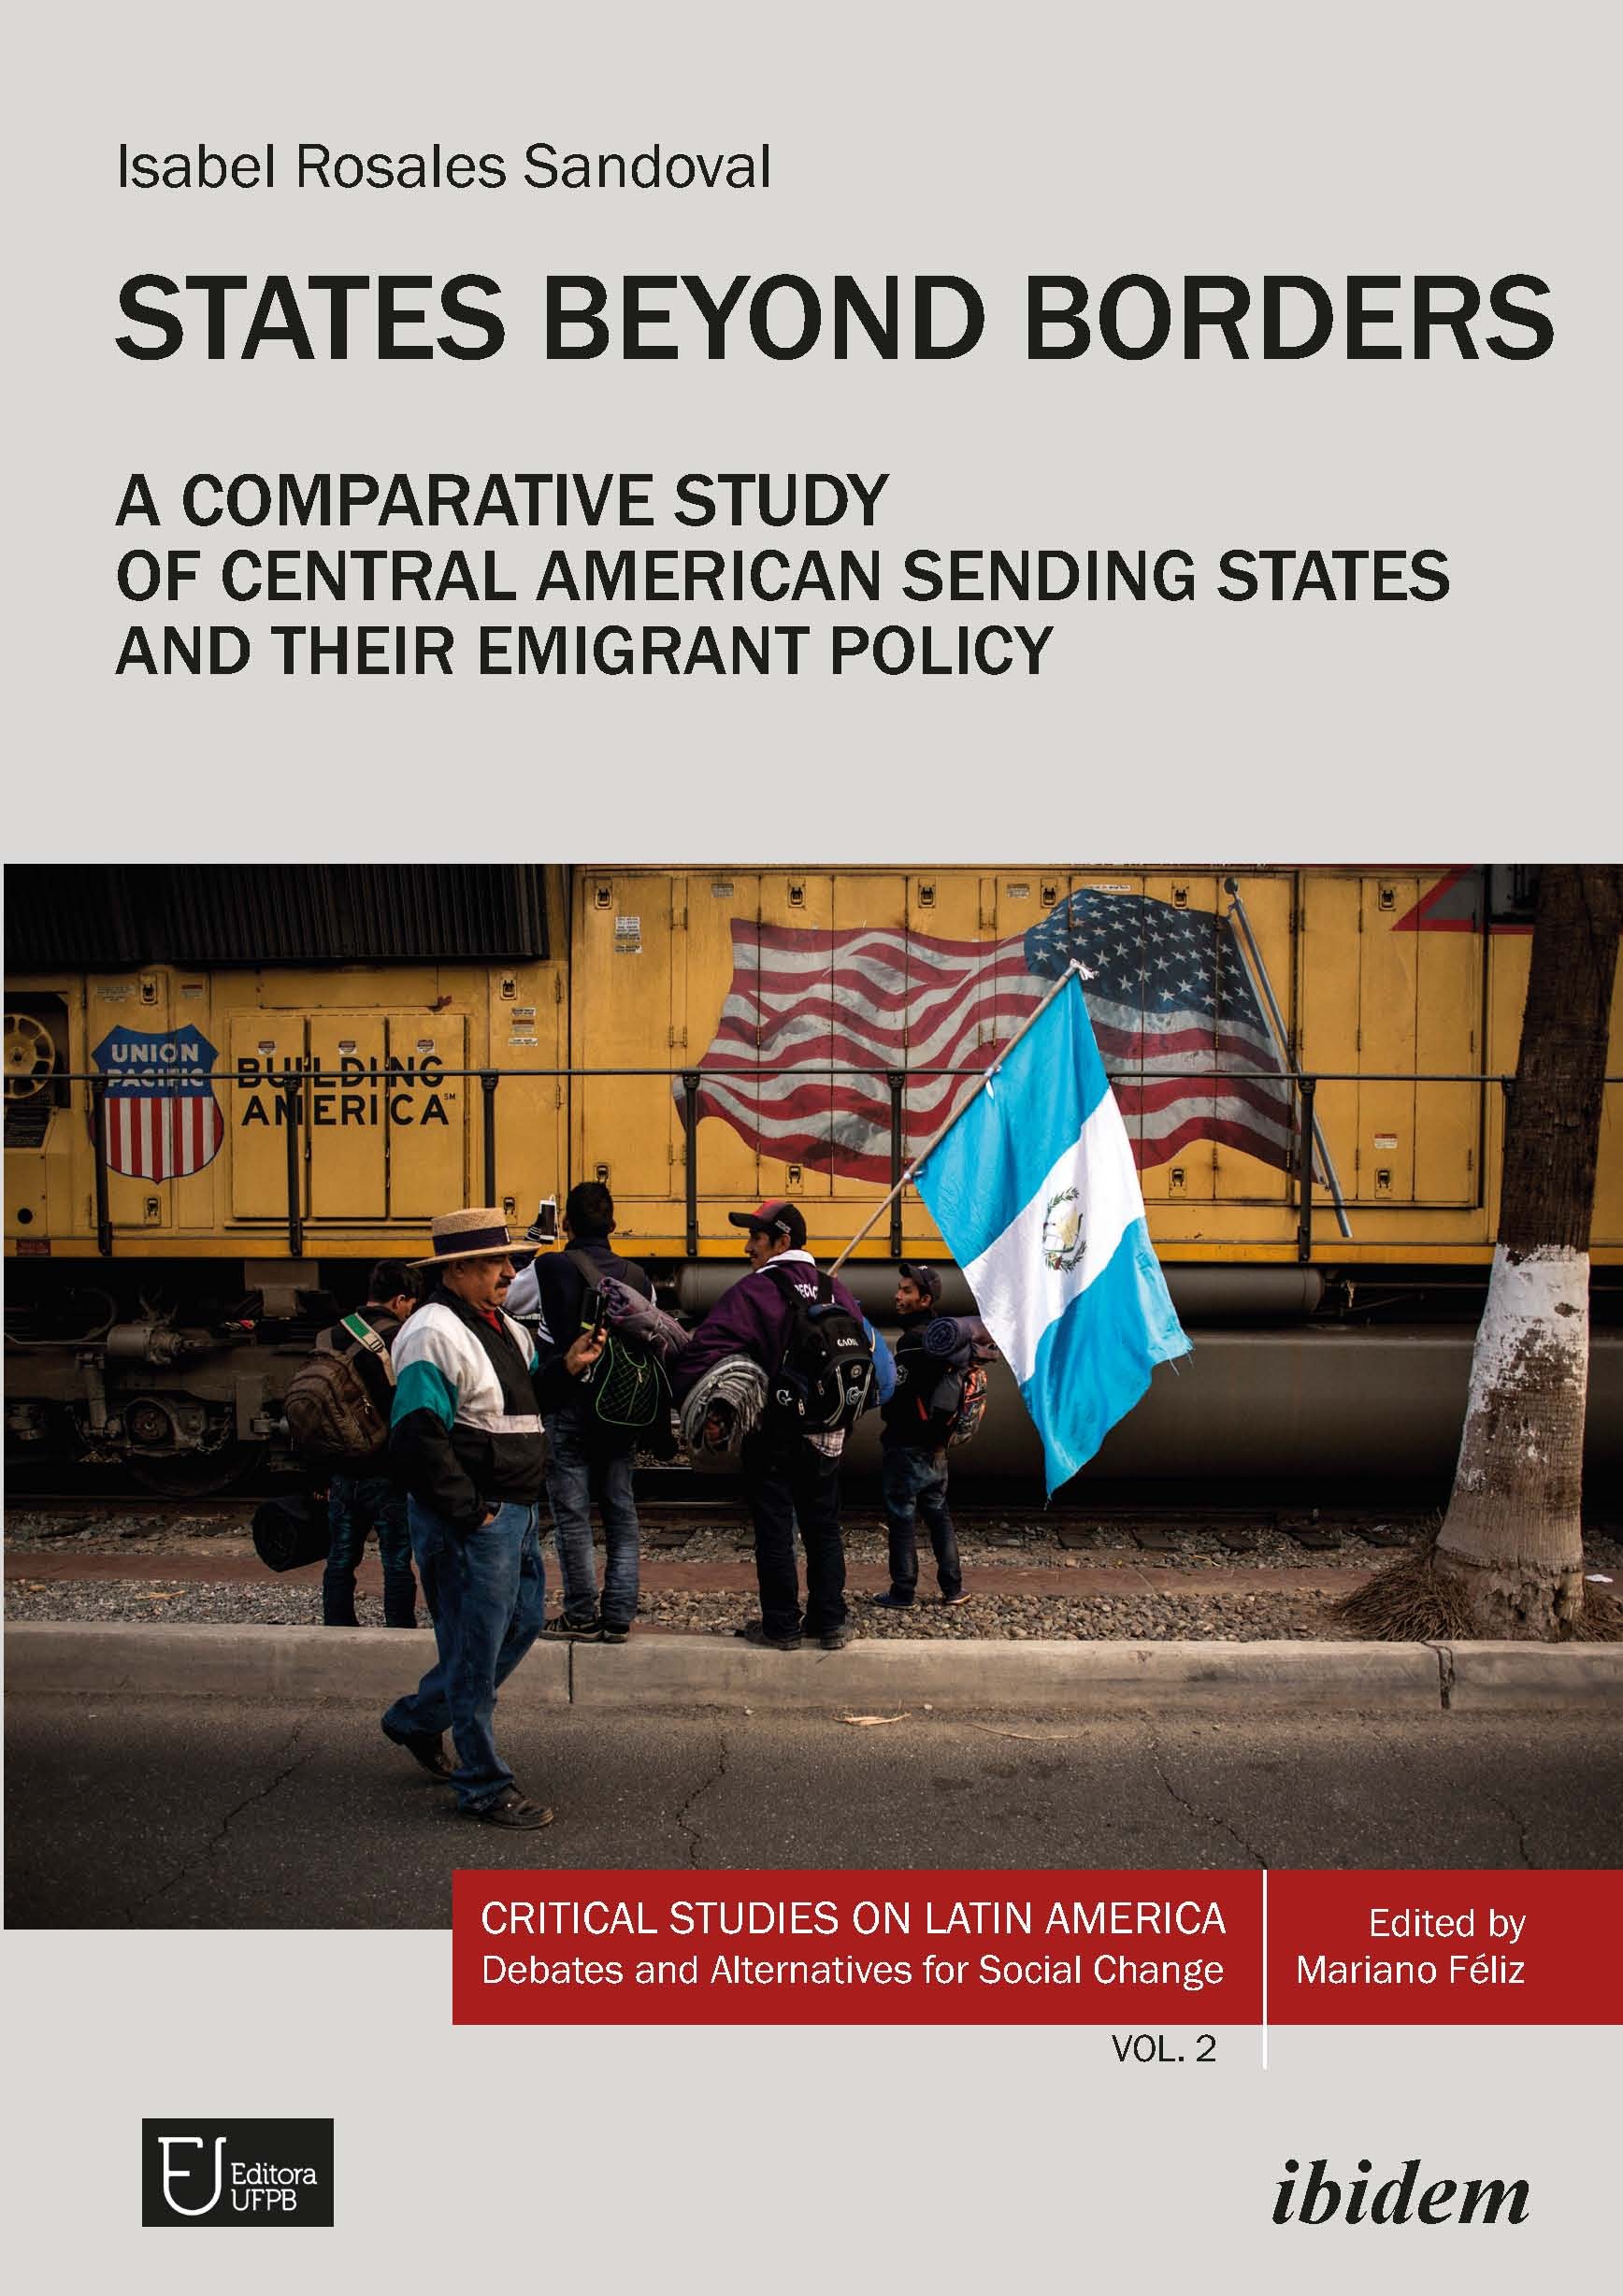 States Beyond Borders: A Comparative Study of Central American Sending States and their Emigrant Policy (1998–2021)